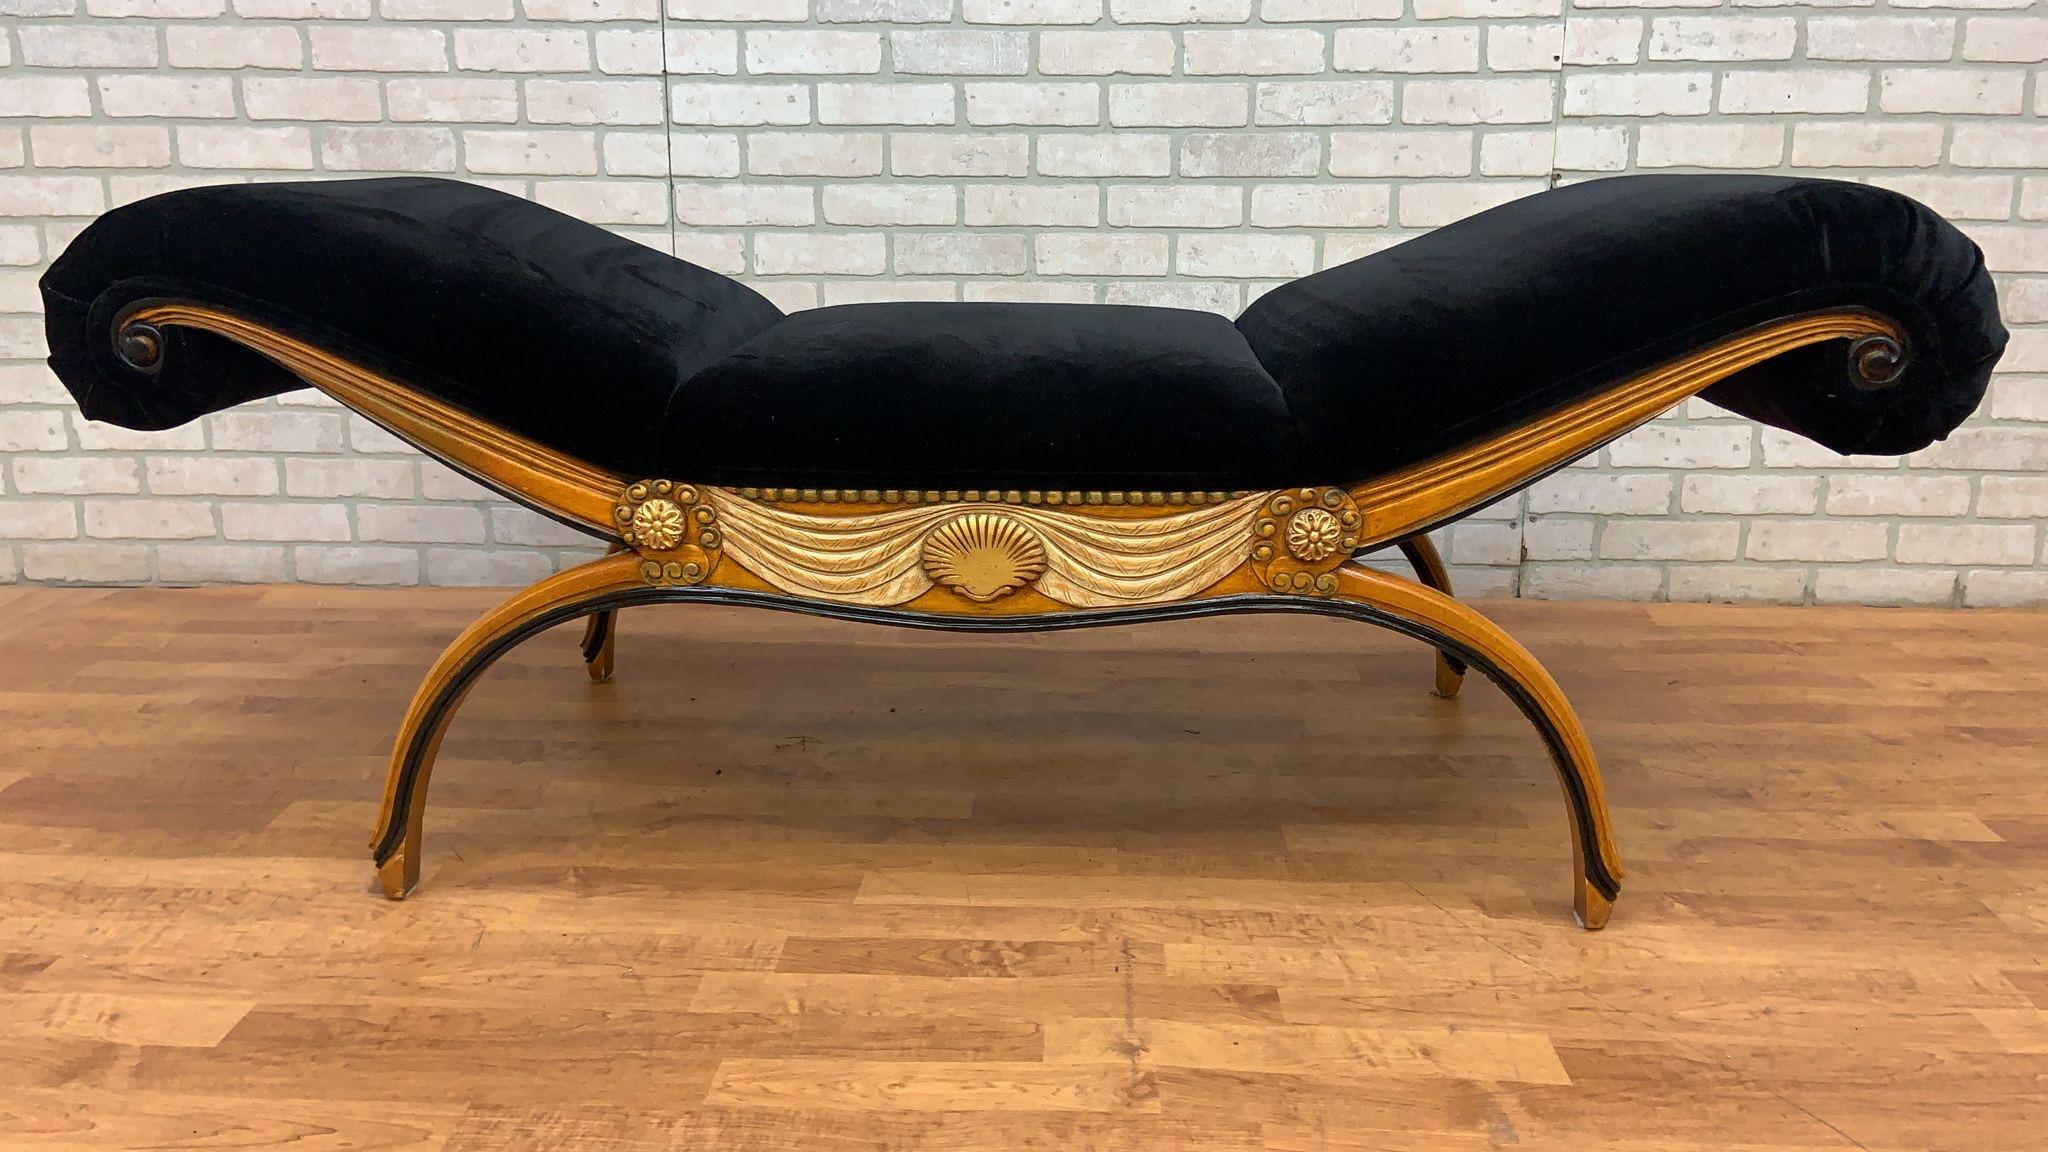 Art Deco Armand-Albert Rateau Style Rolled Arm Bench Newly Upholstered in Black Velvet

Gorgeous Neoclassical carved bow legged bench with elegantly arched rolled arms. Newly upholstered in a a beautiful, plush Italian velvet. This bench is finely